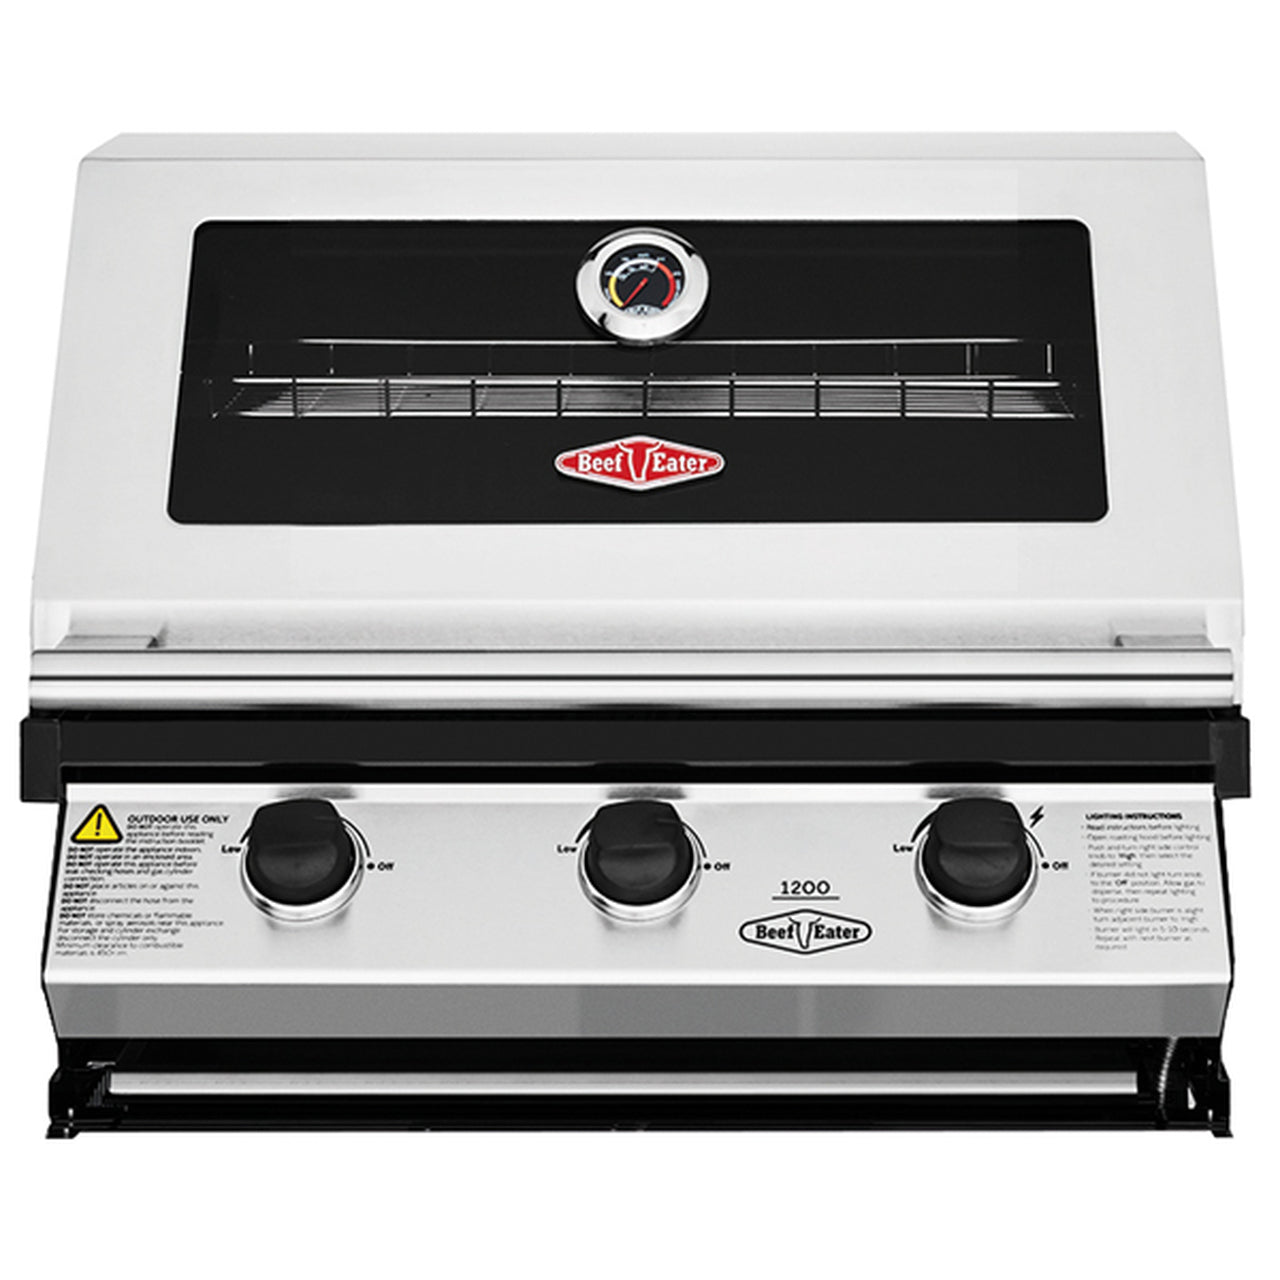 Beefeater 1200s Built-in 3 Burner Gas Bbq